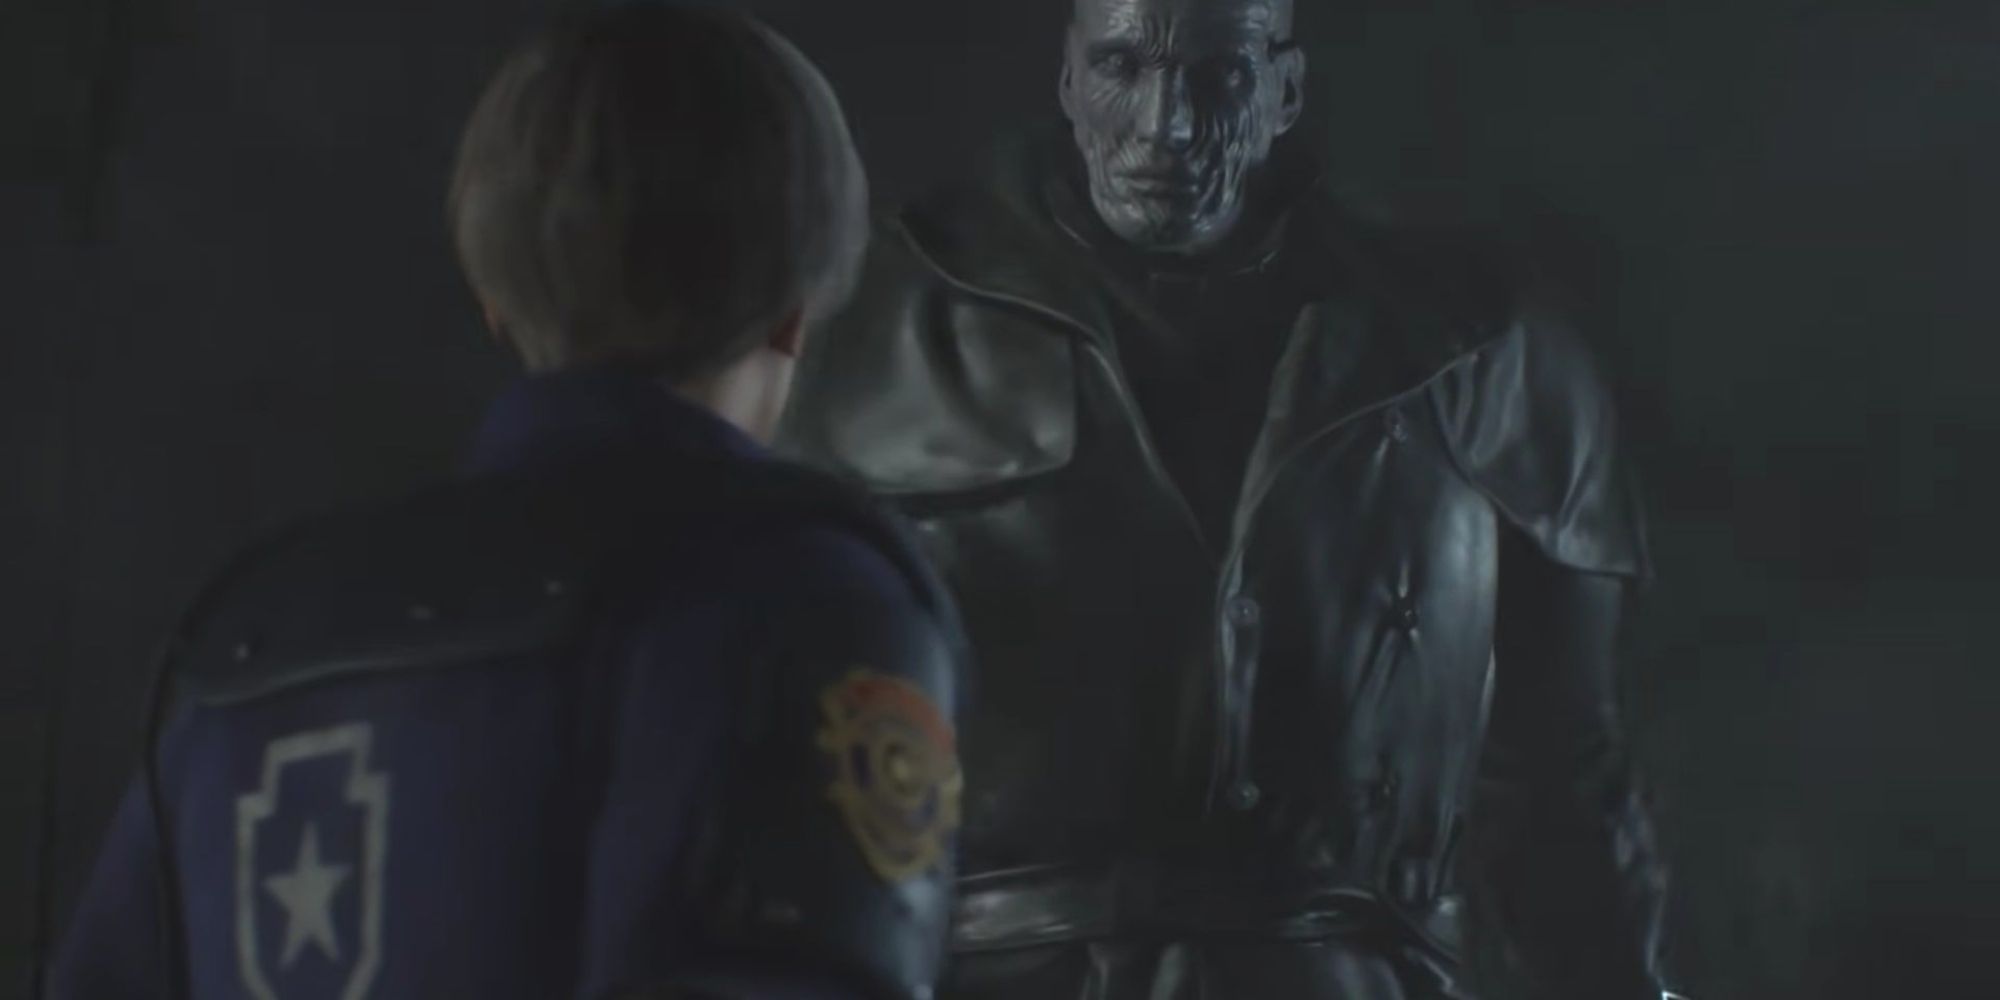 Leon and Mr. X staring at each other in the garage from Resident Evil 2 Remake